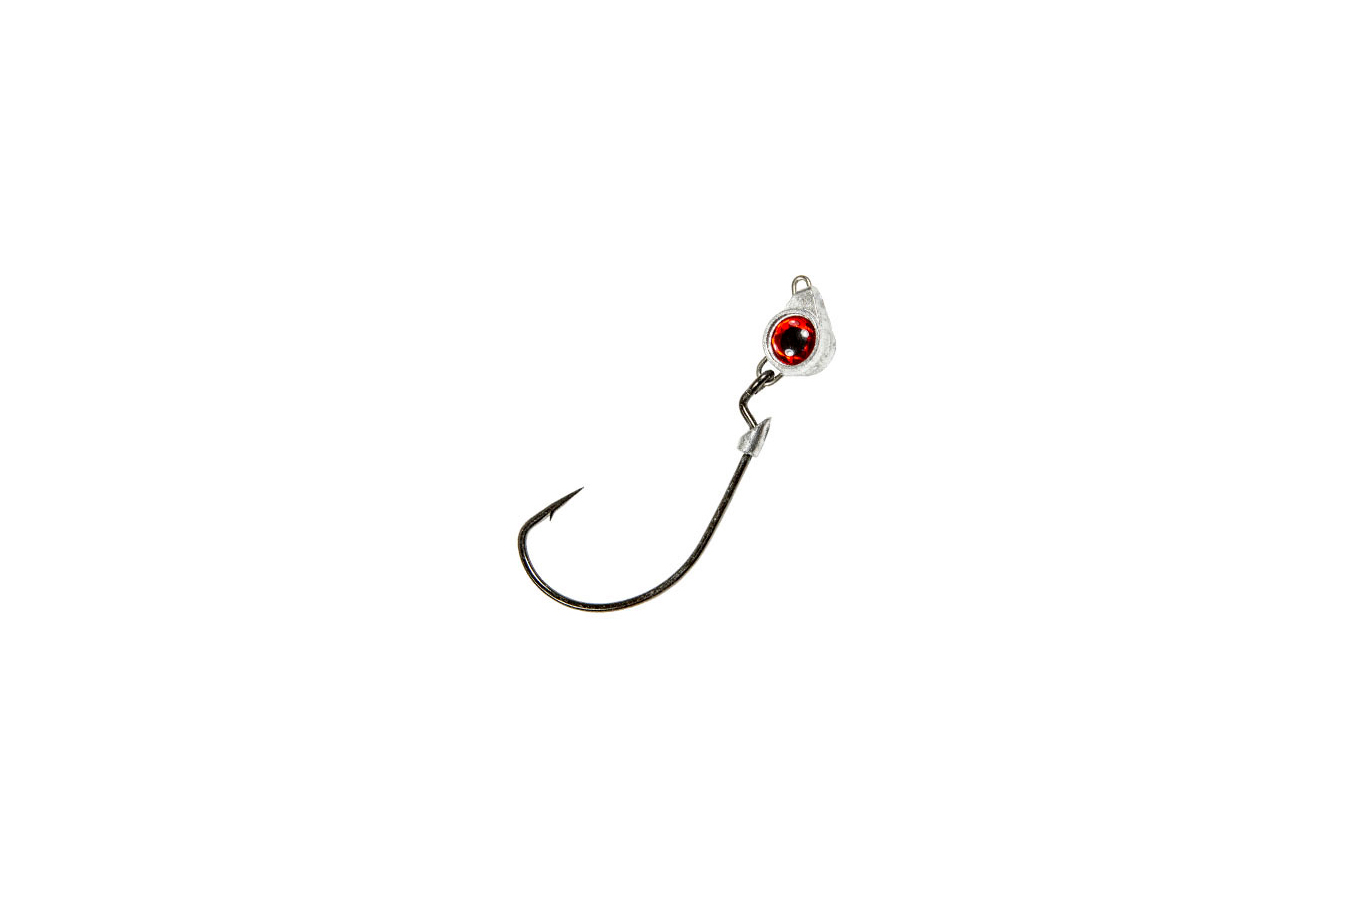 Discount Z Man Fishing Products Texas Eye Jighead 1/8oz Red for Sale, Online Fishing Store